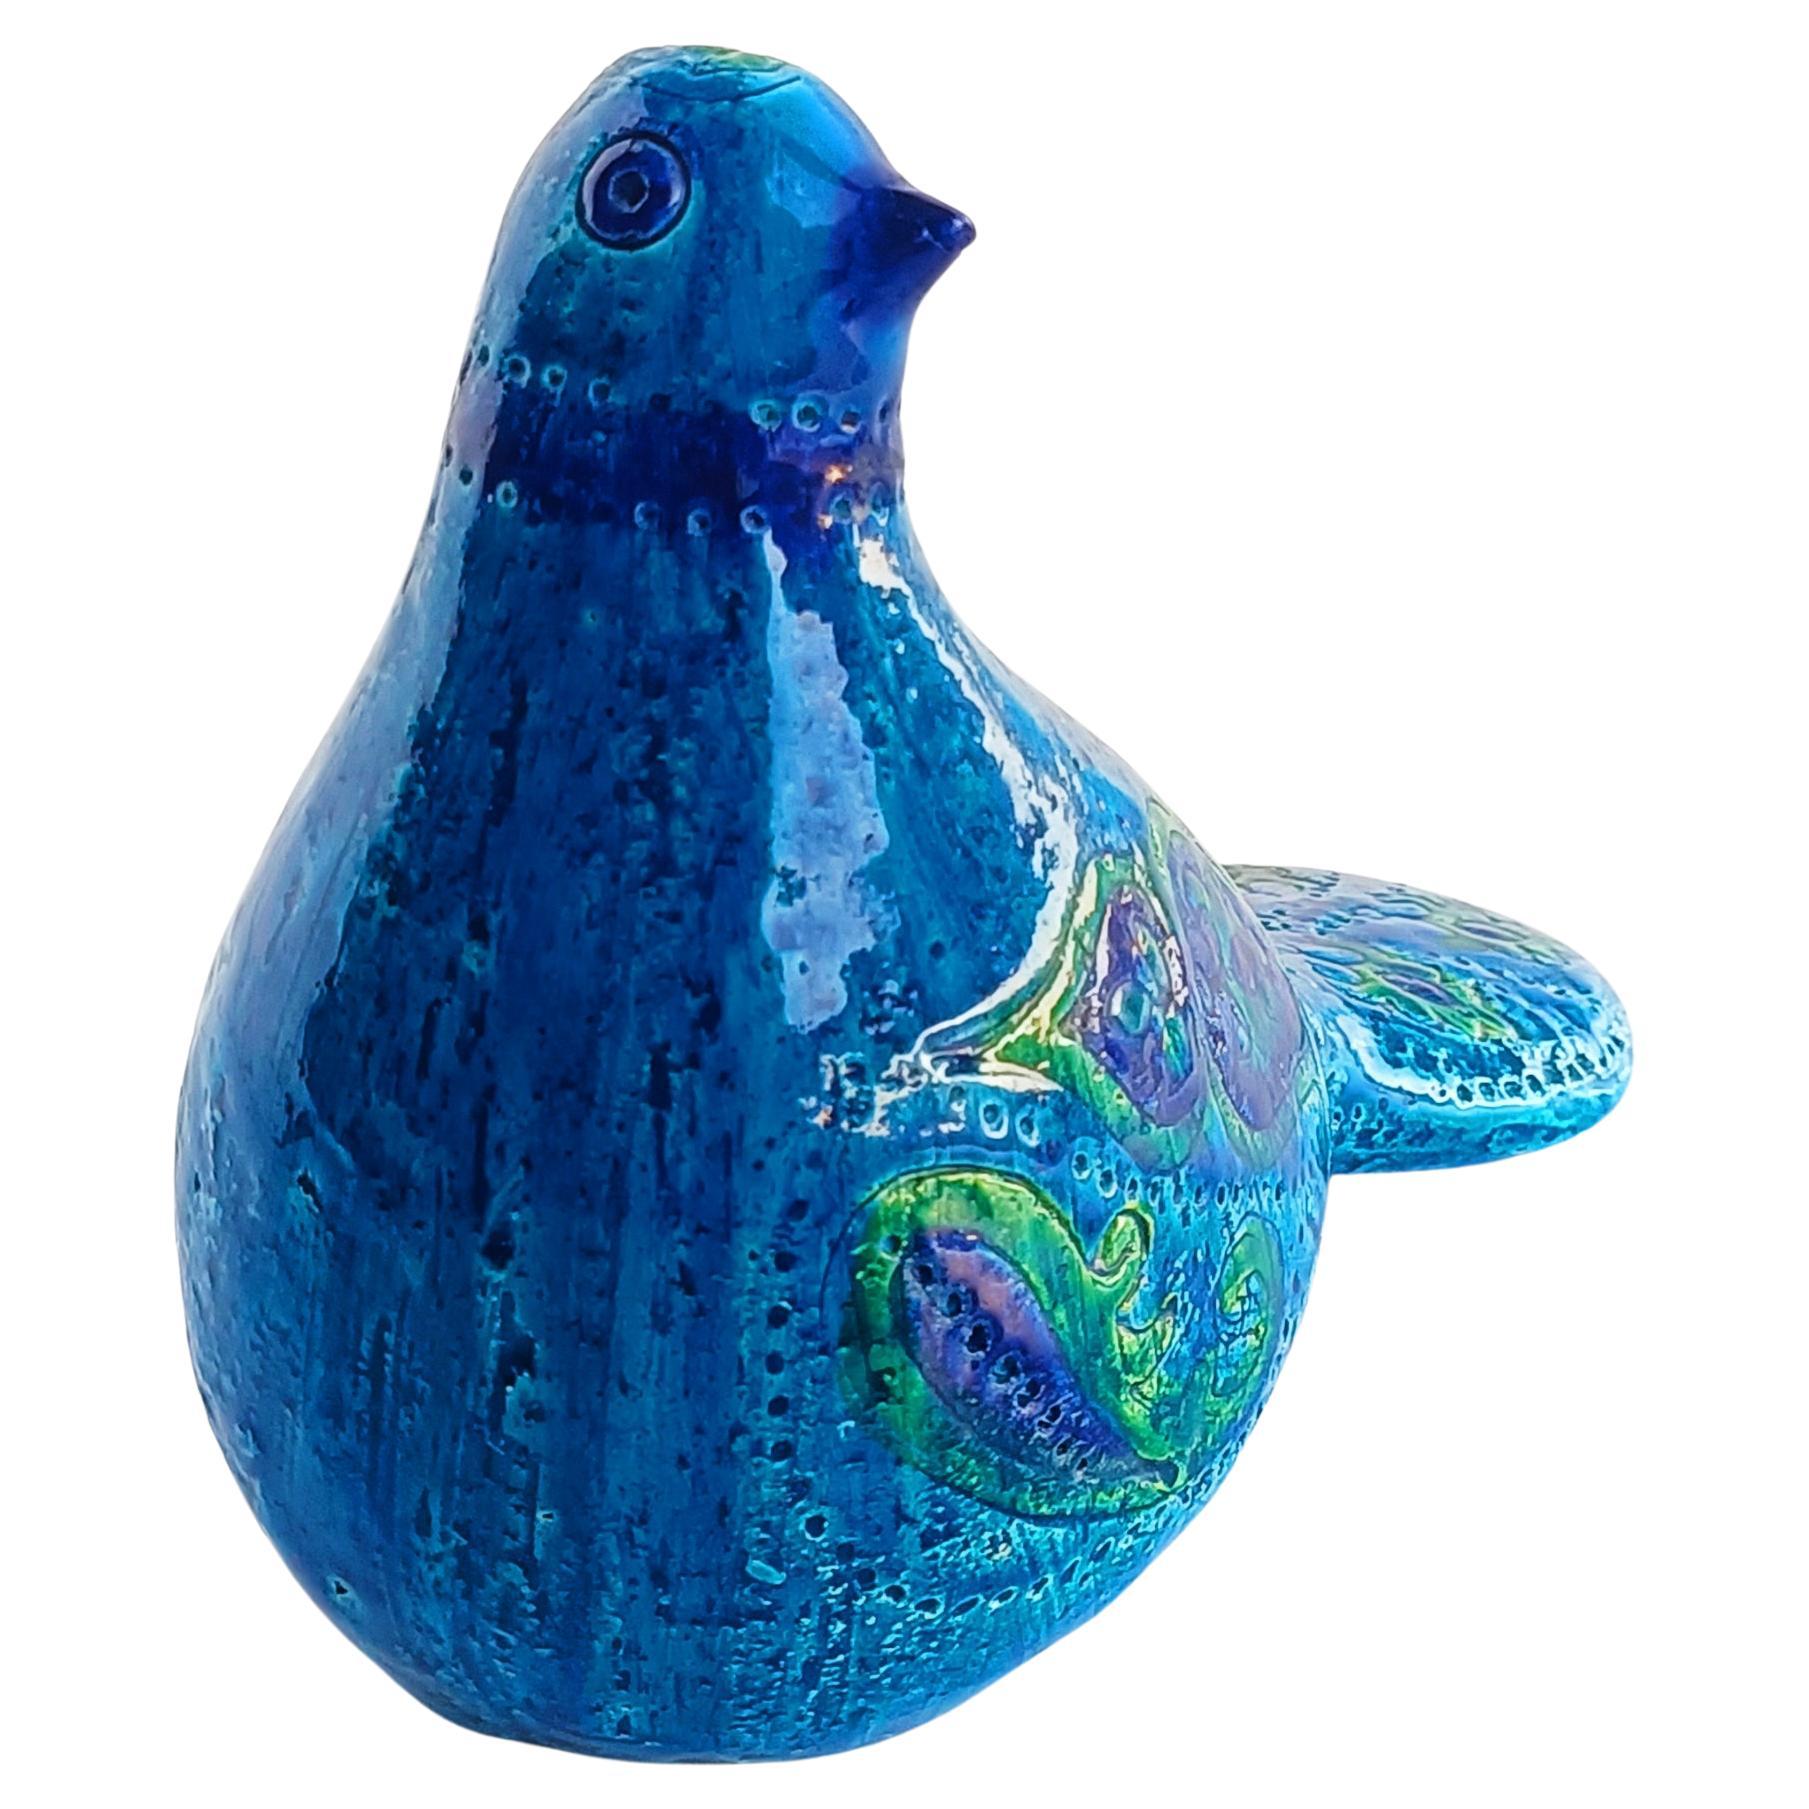 This Bitossi ceramic dove sculpture by Aldo Londi is a stunning example of Mid-Century Italian pottery. Handcrafted in Italy during the 1960s, it showcases the beautiful Paisley decor in the Rimini Blu glaze colors, which are characteristic of the